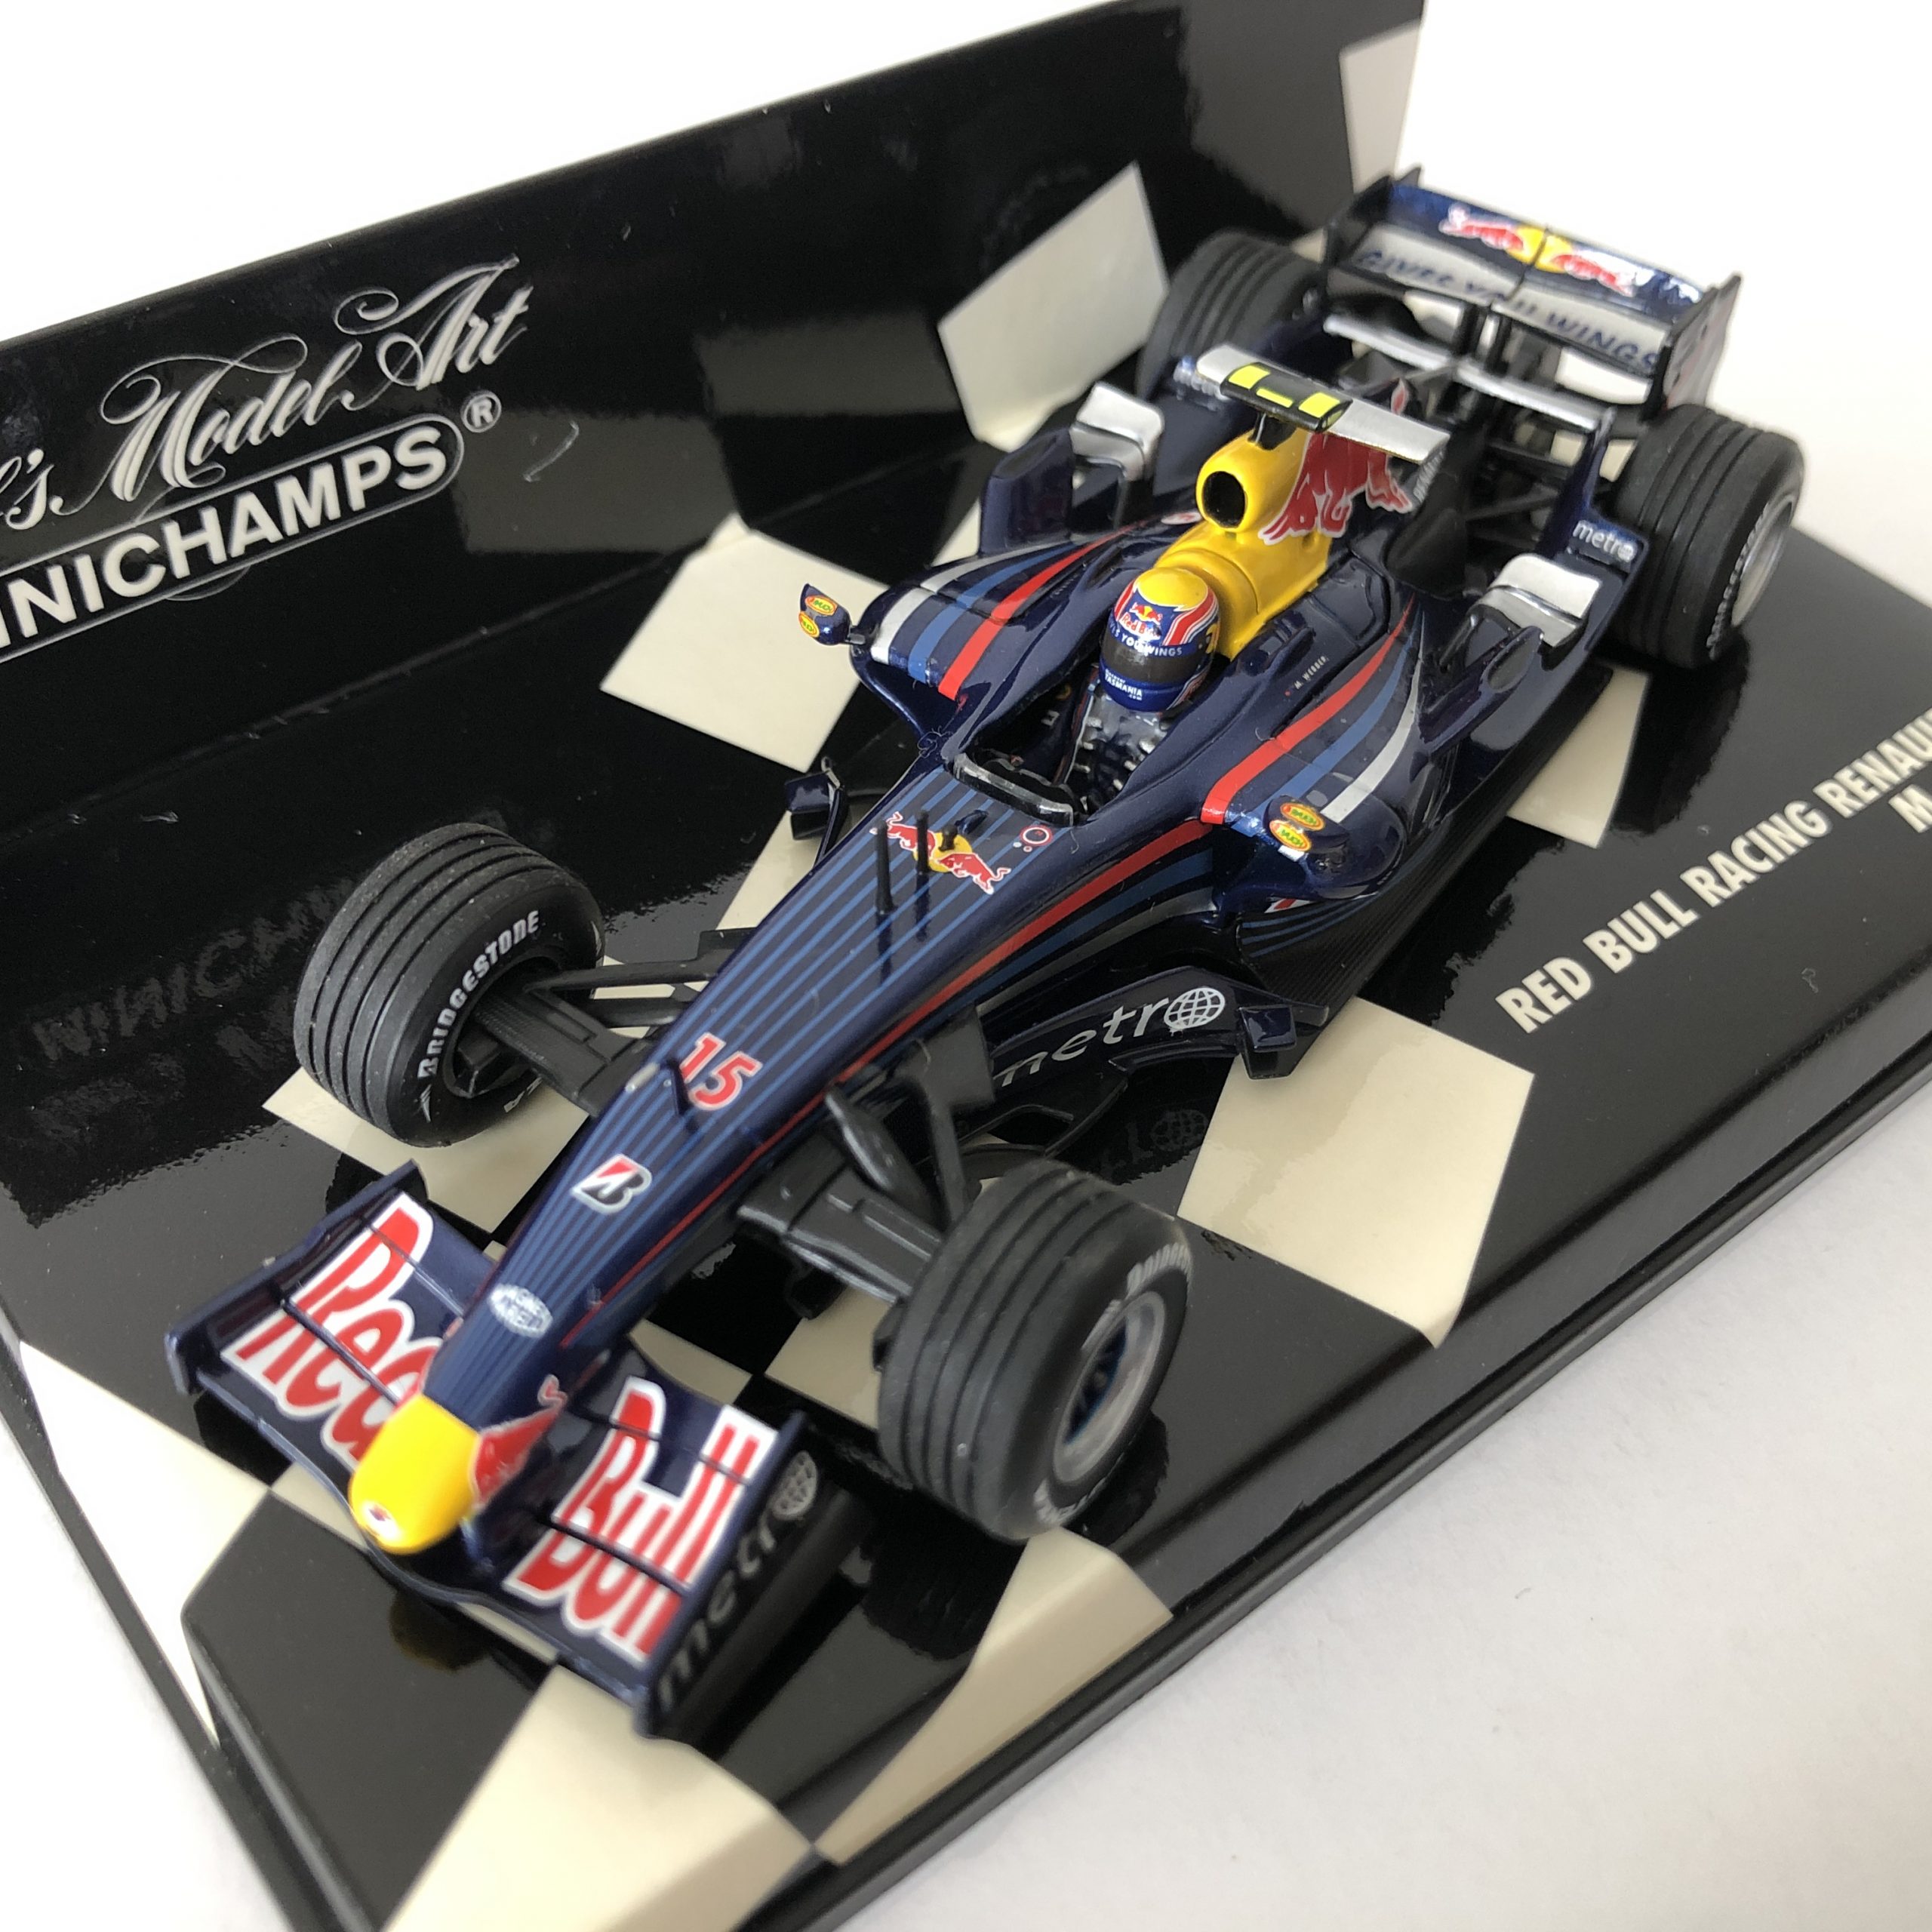 2007 Mark Webber | Red Bull Racing RB3 | Minichamps Diecast 1:43 Scale